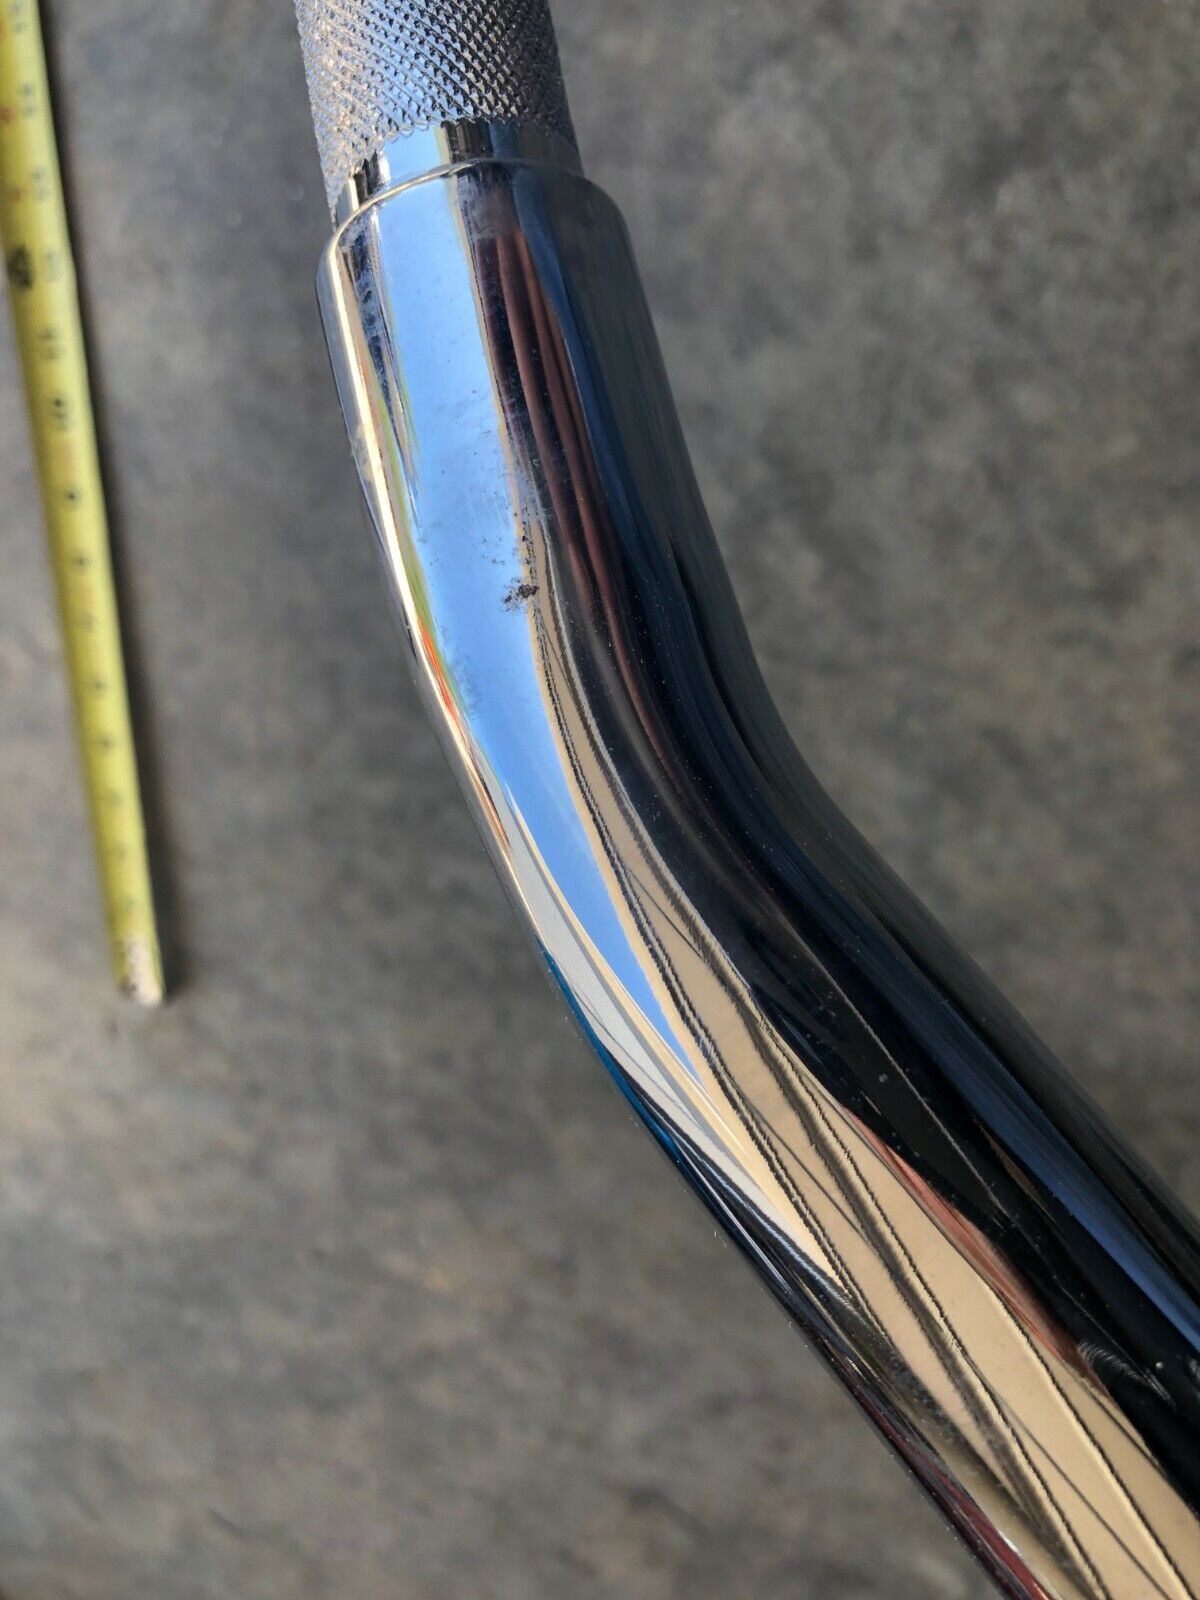 New Chubby Drag Bars 1 1/4" Dragster 31"